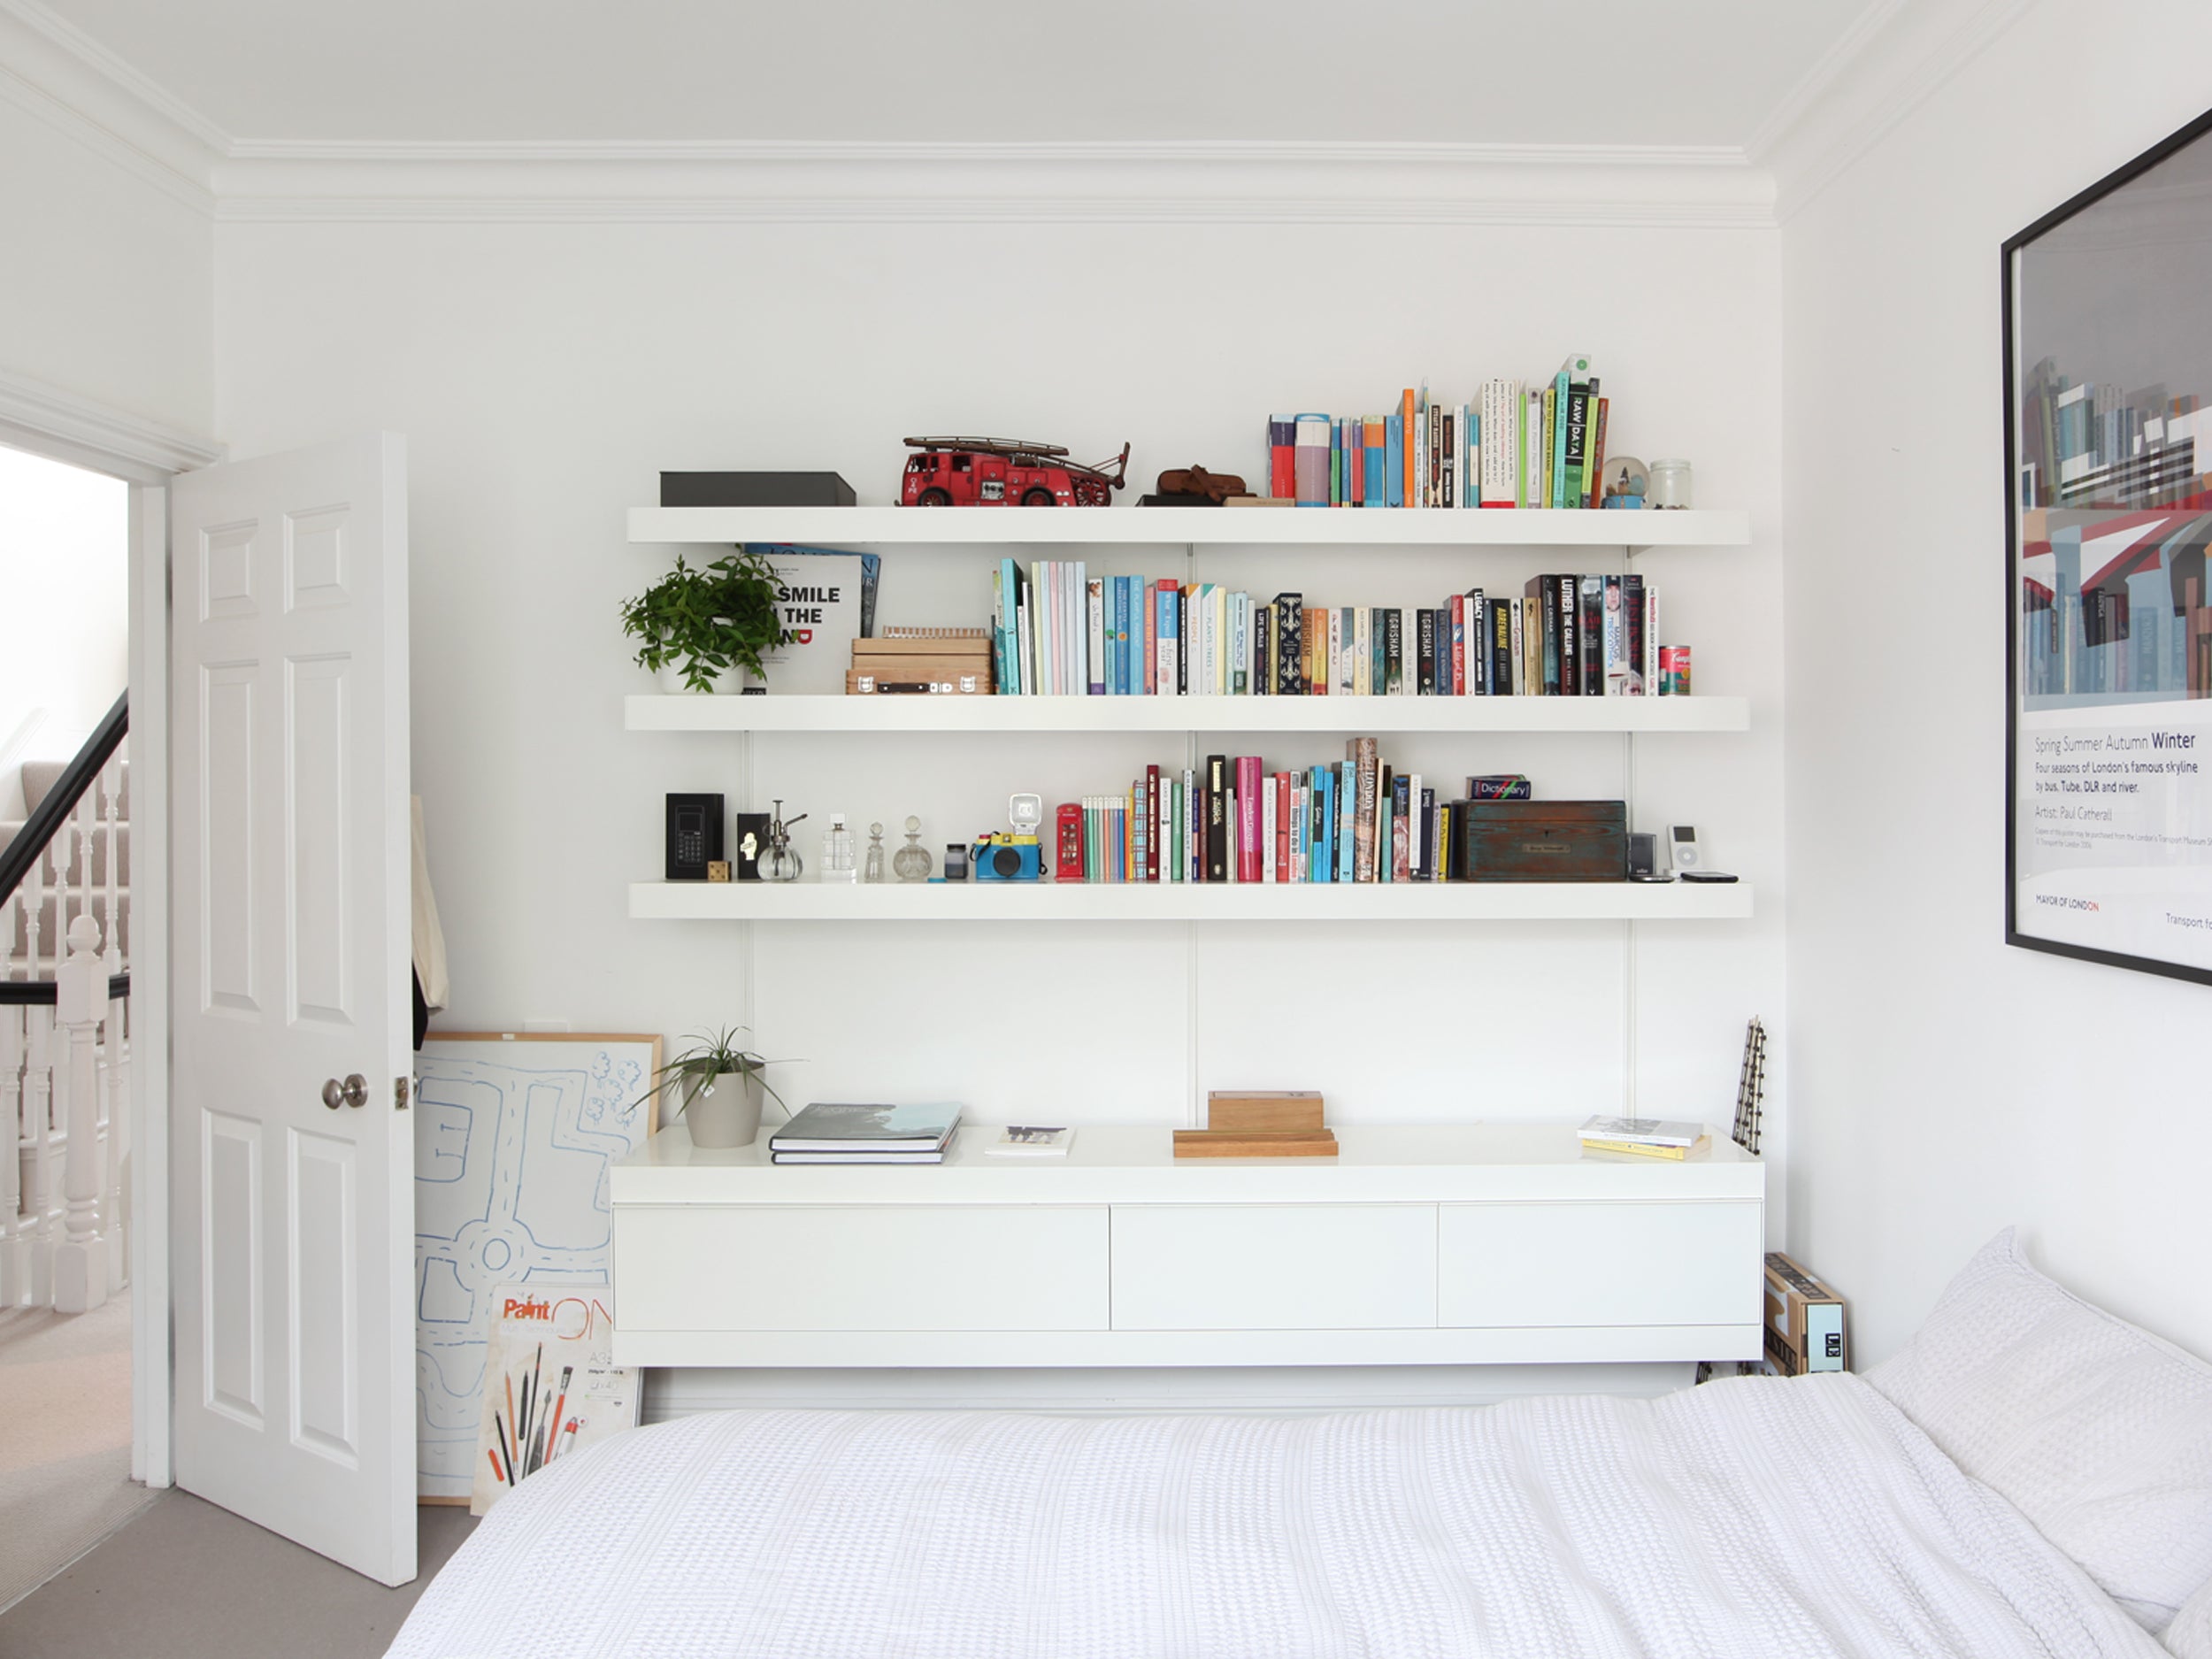 Bedroom shelving system with drawers and shelves above